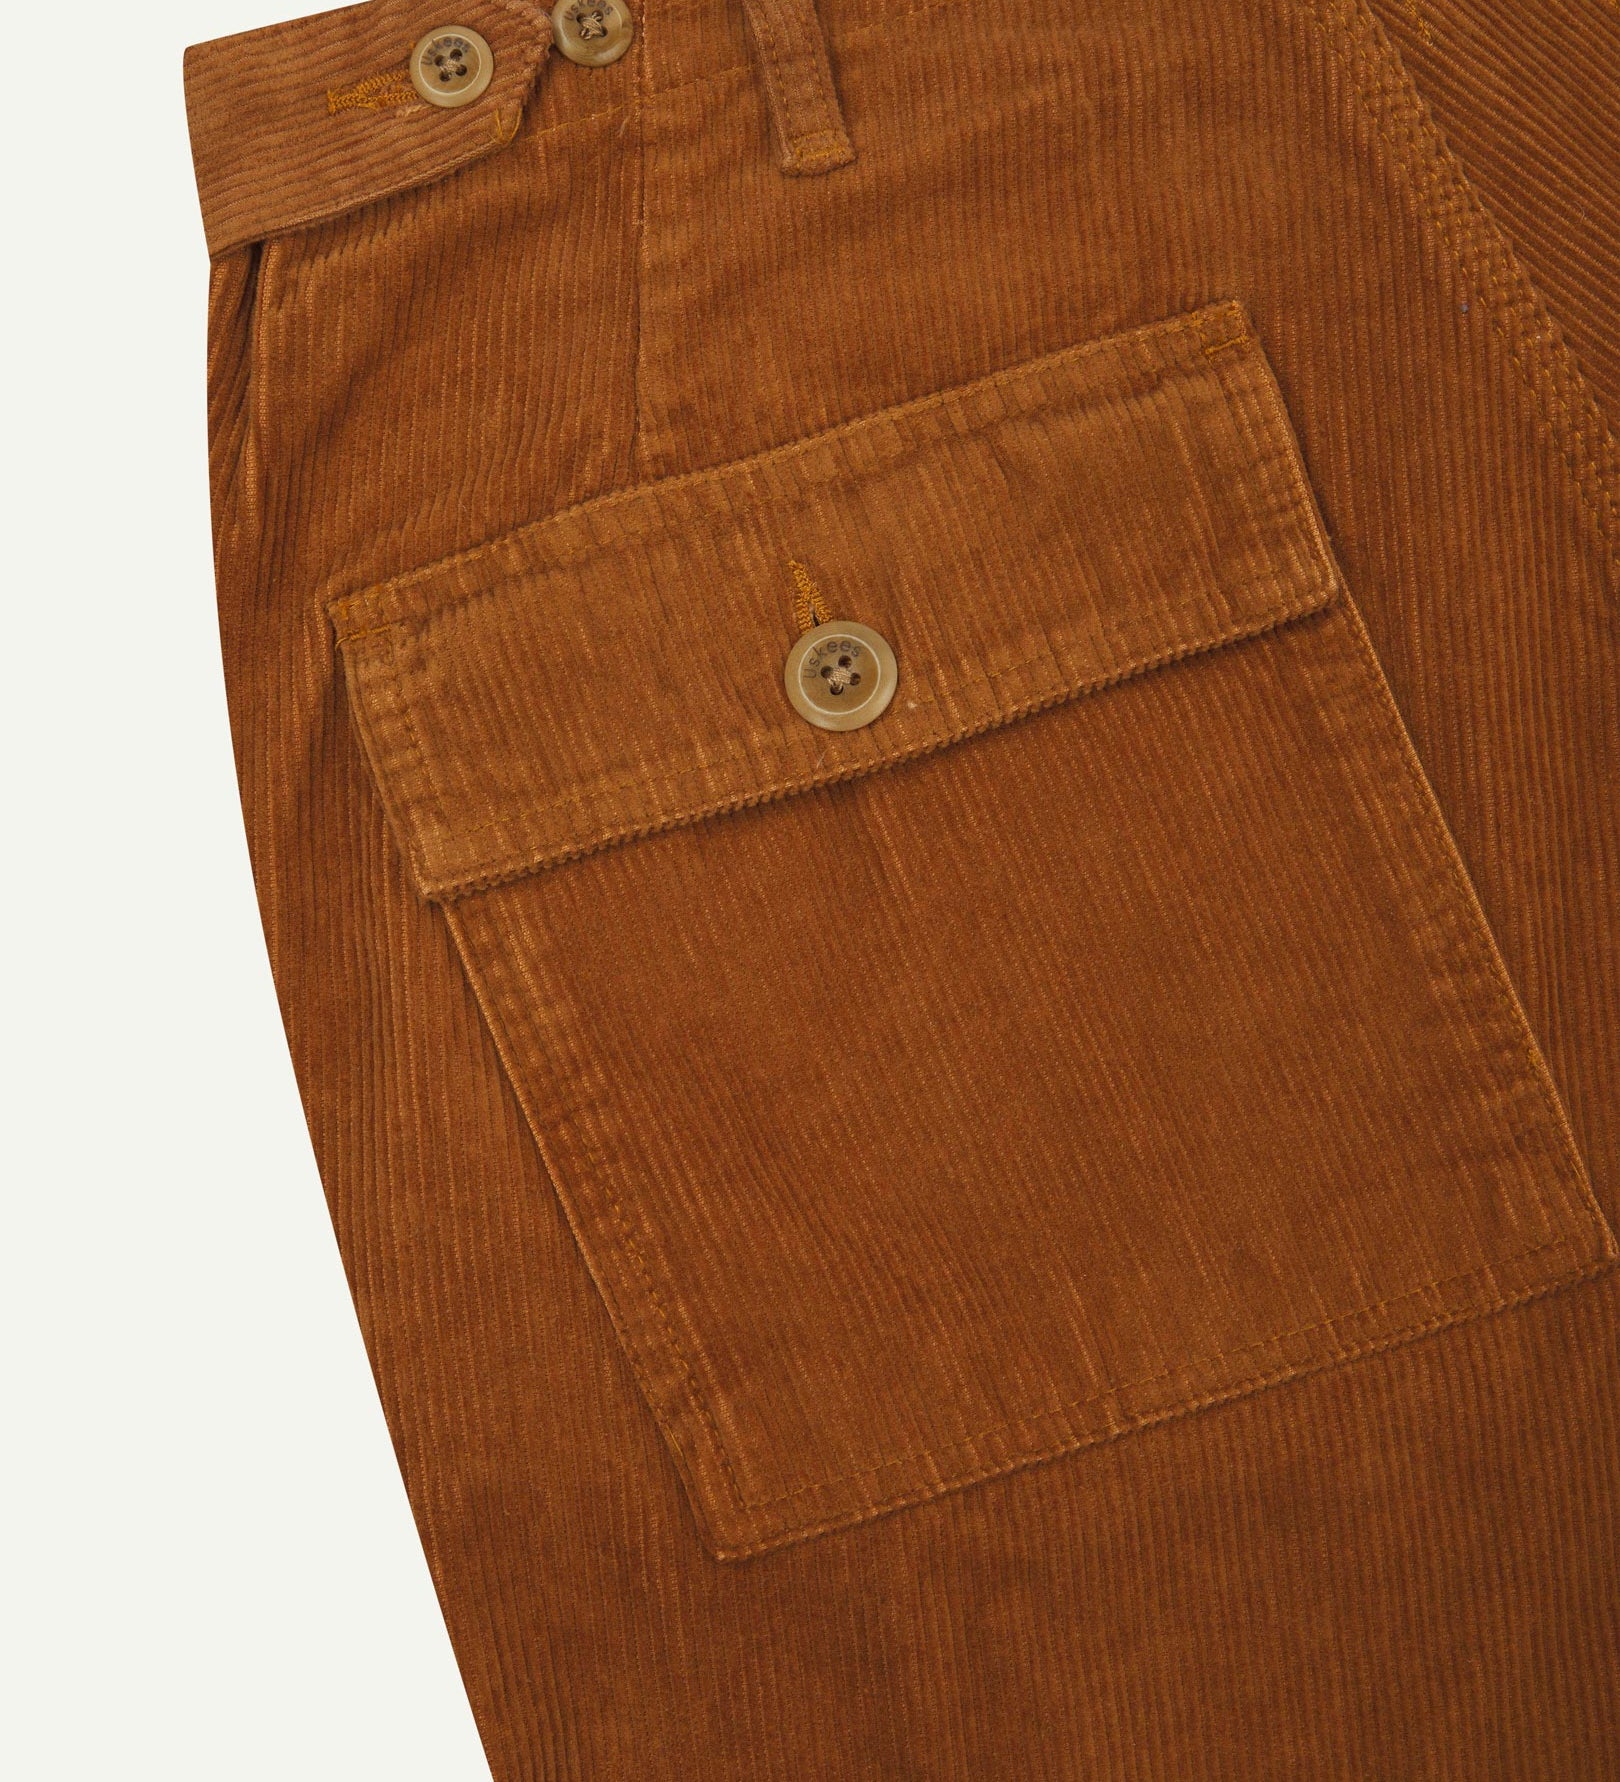 Close-up reverse view of Uskees tan corduroy work pants with focus on left rear pocket, belt loops, triple stitching and adjustable button waist.